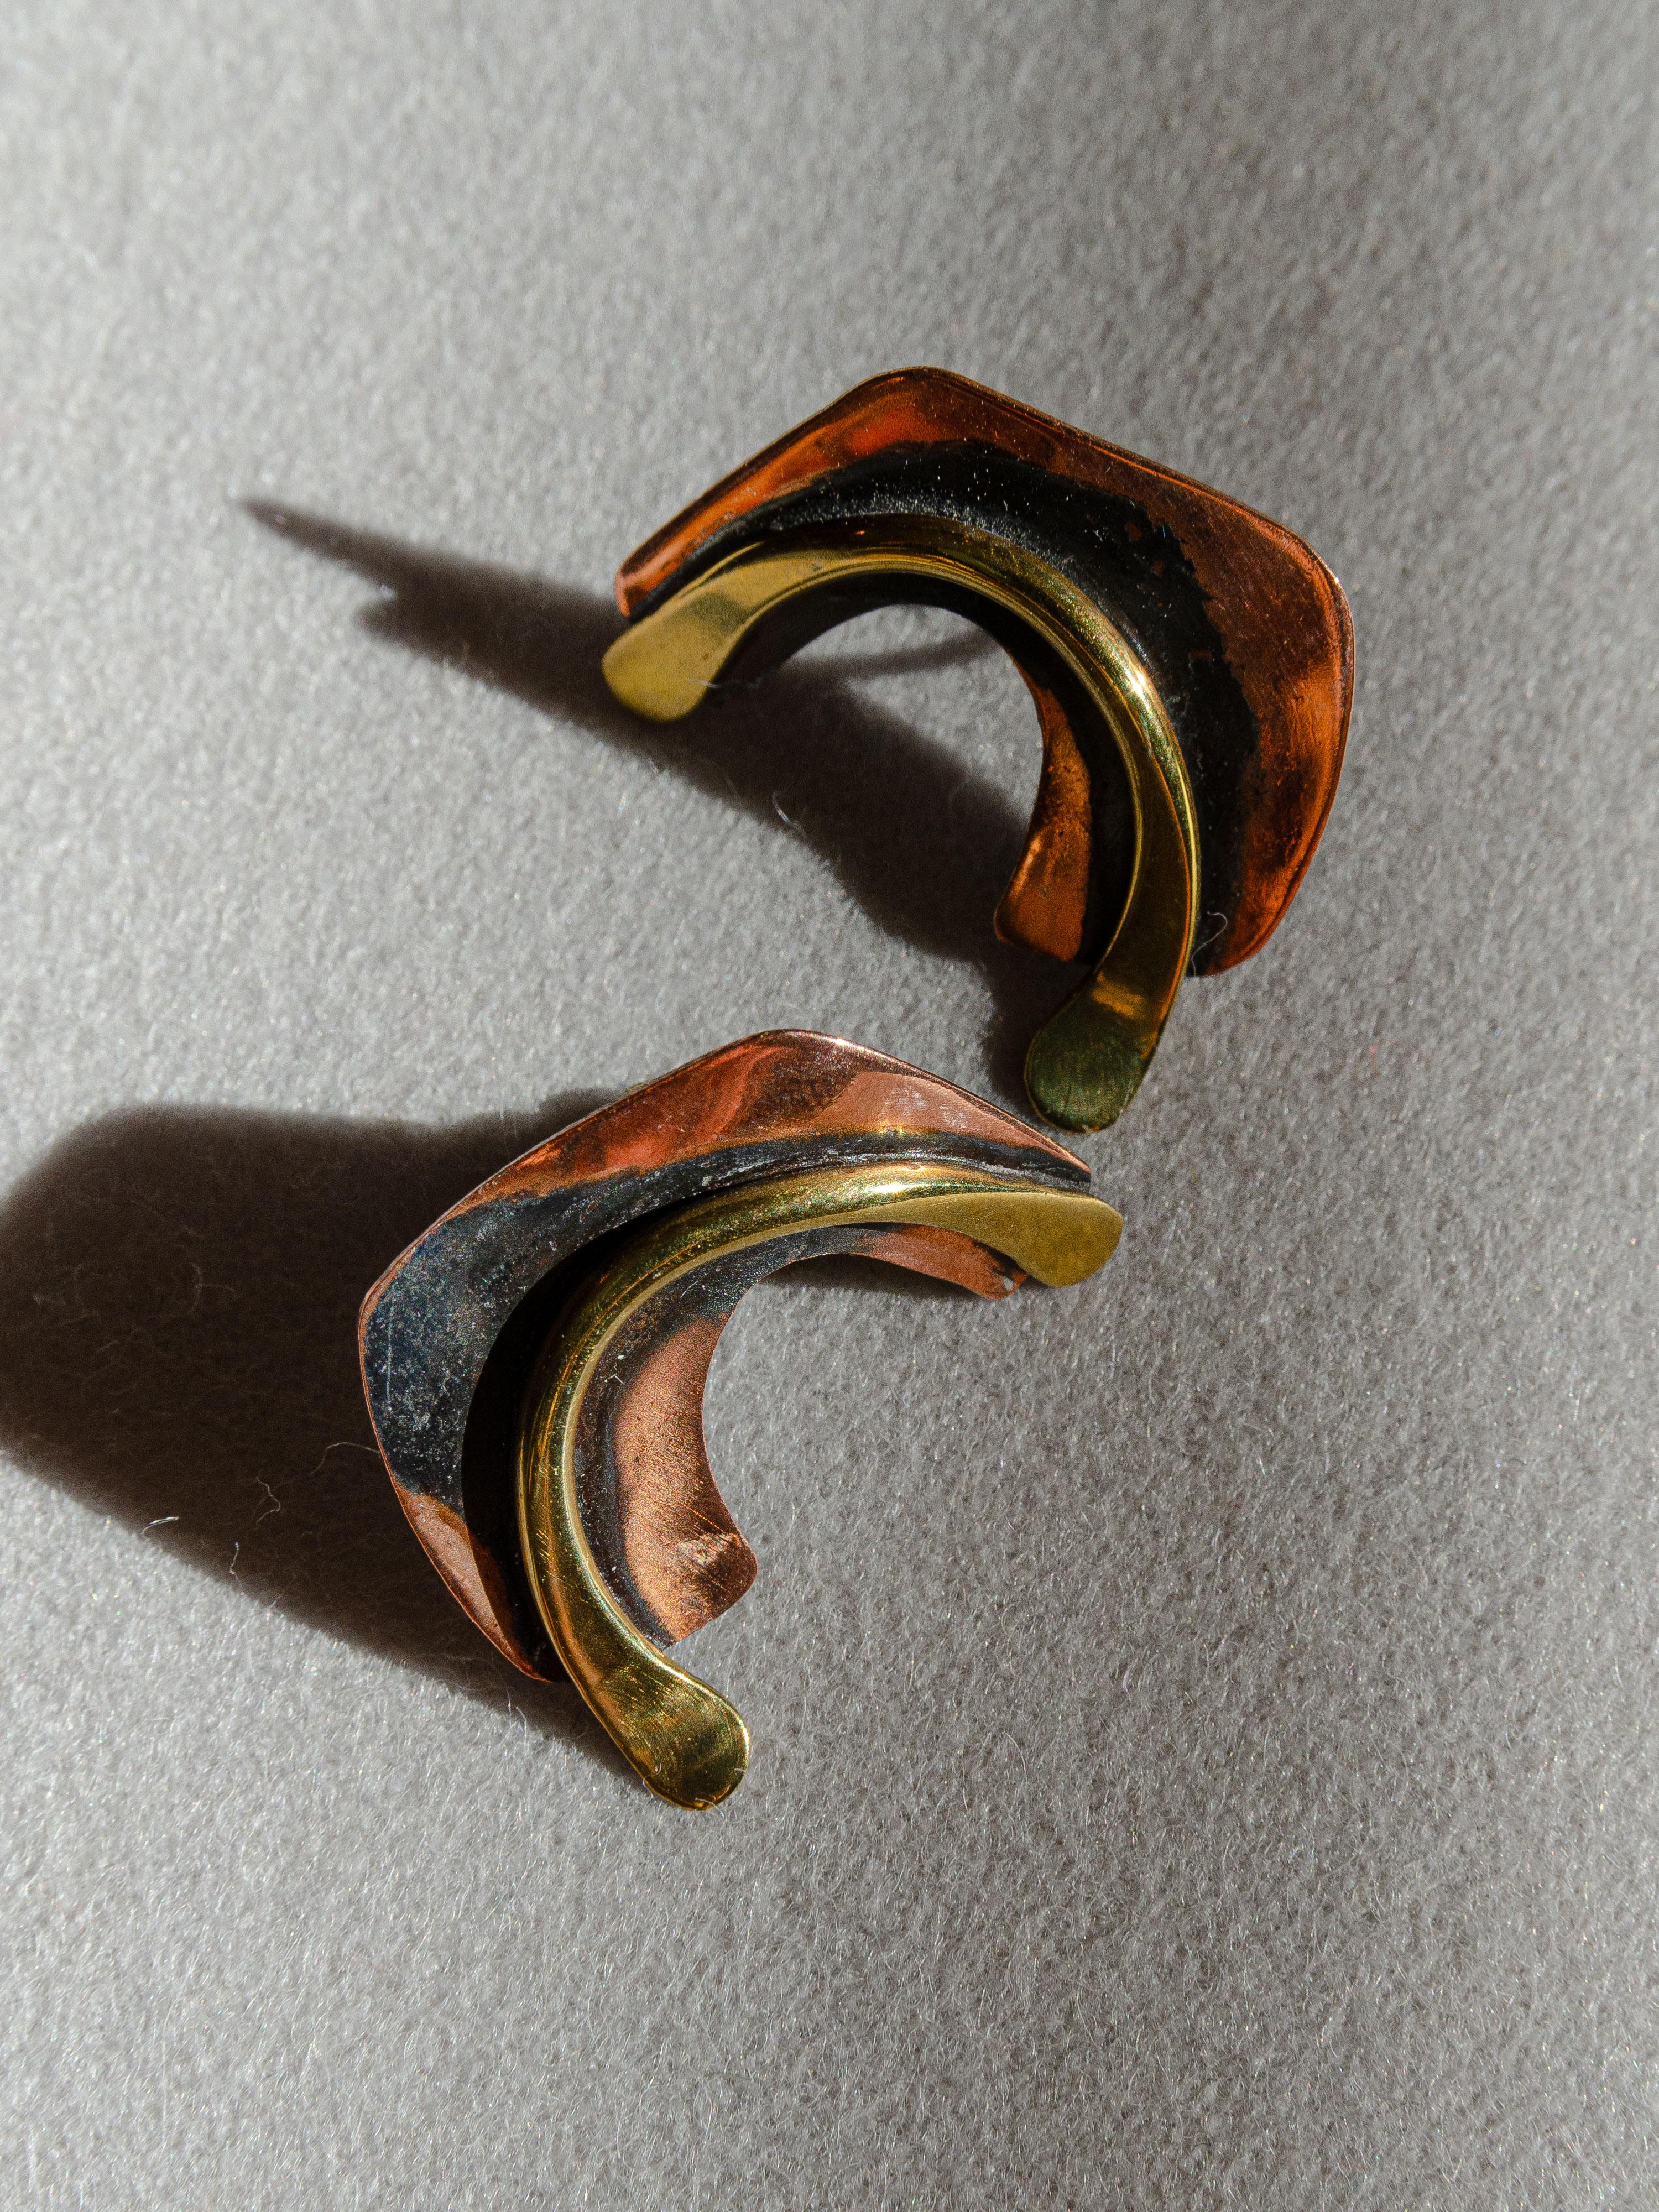 A graceful pair of copper and brass biomorphic earrings designed by Greenwich Village modernist jeweler Art Smith in the 1950's. Smith is considered a master jewelers during the modernist movement of the mid-twentieth century.   

Fusing eclectic